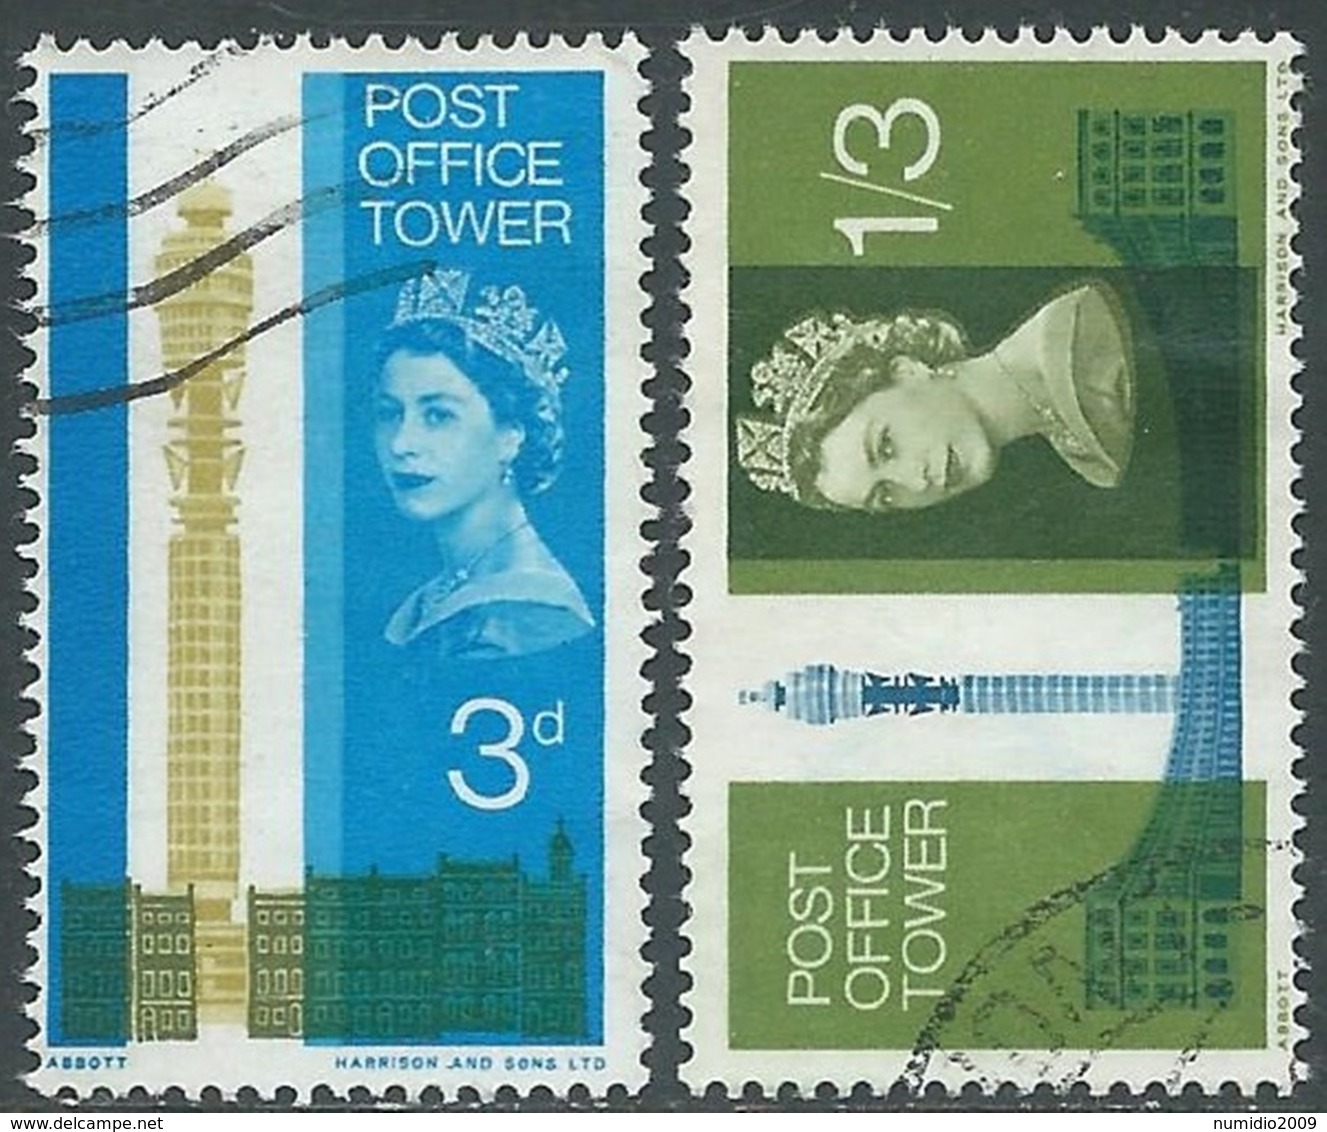 1965 GREAT BRITAIN USED OPENING OF POST OFFICE TOWER SG 679/80 - RC3-5 - Usati